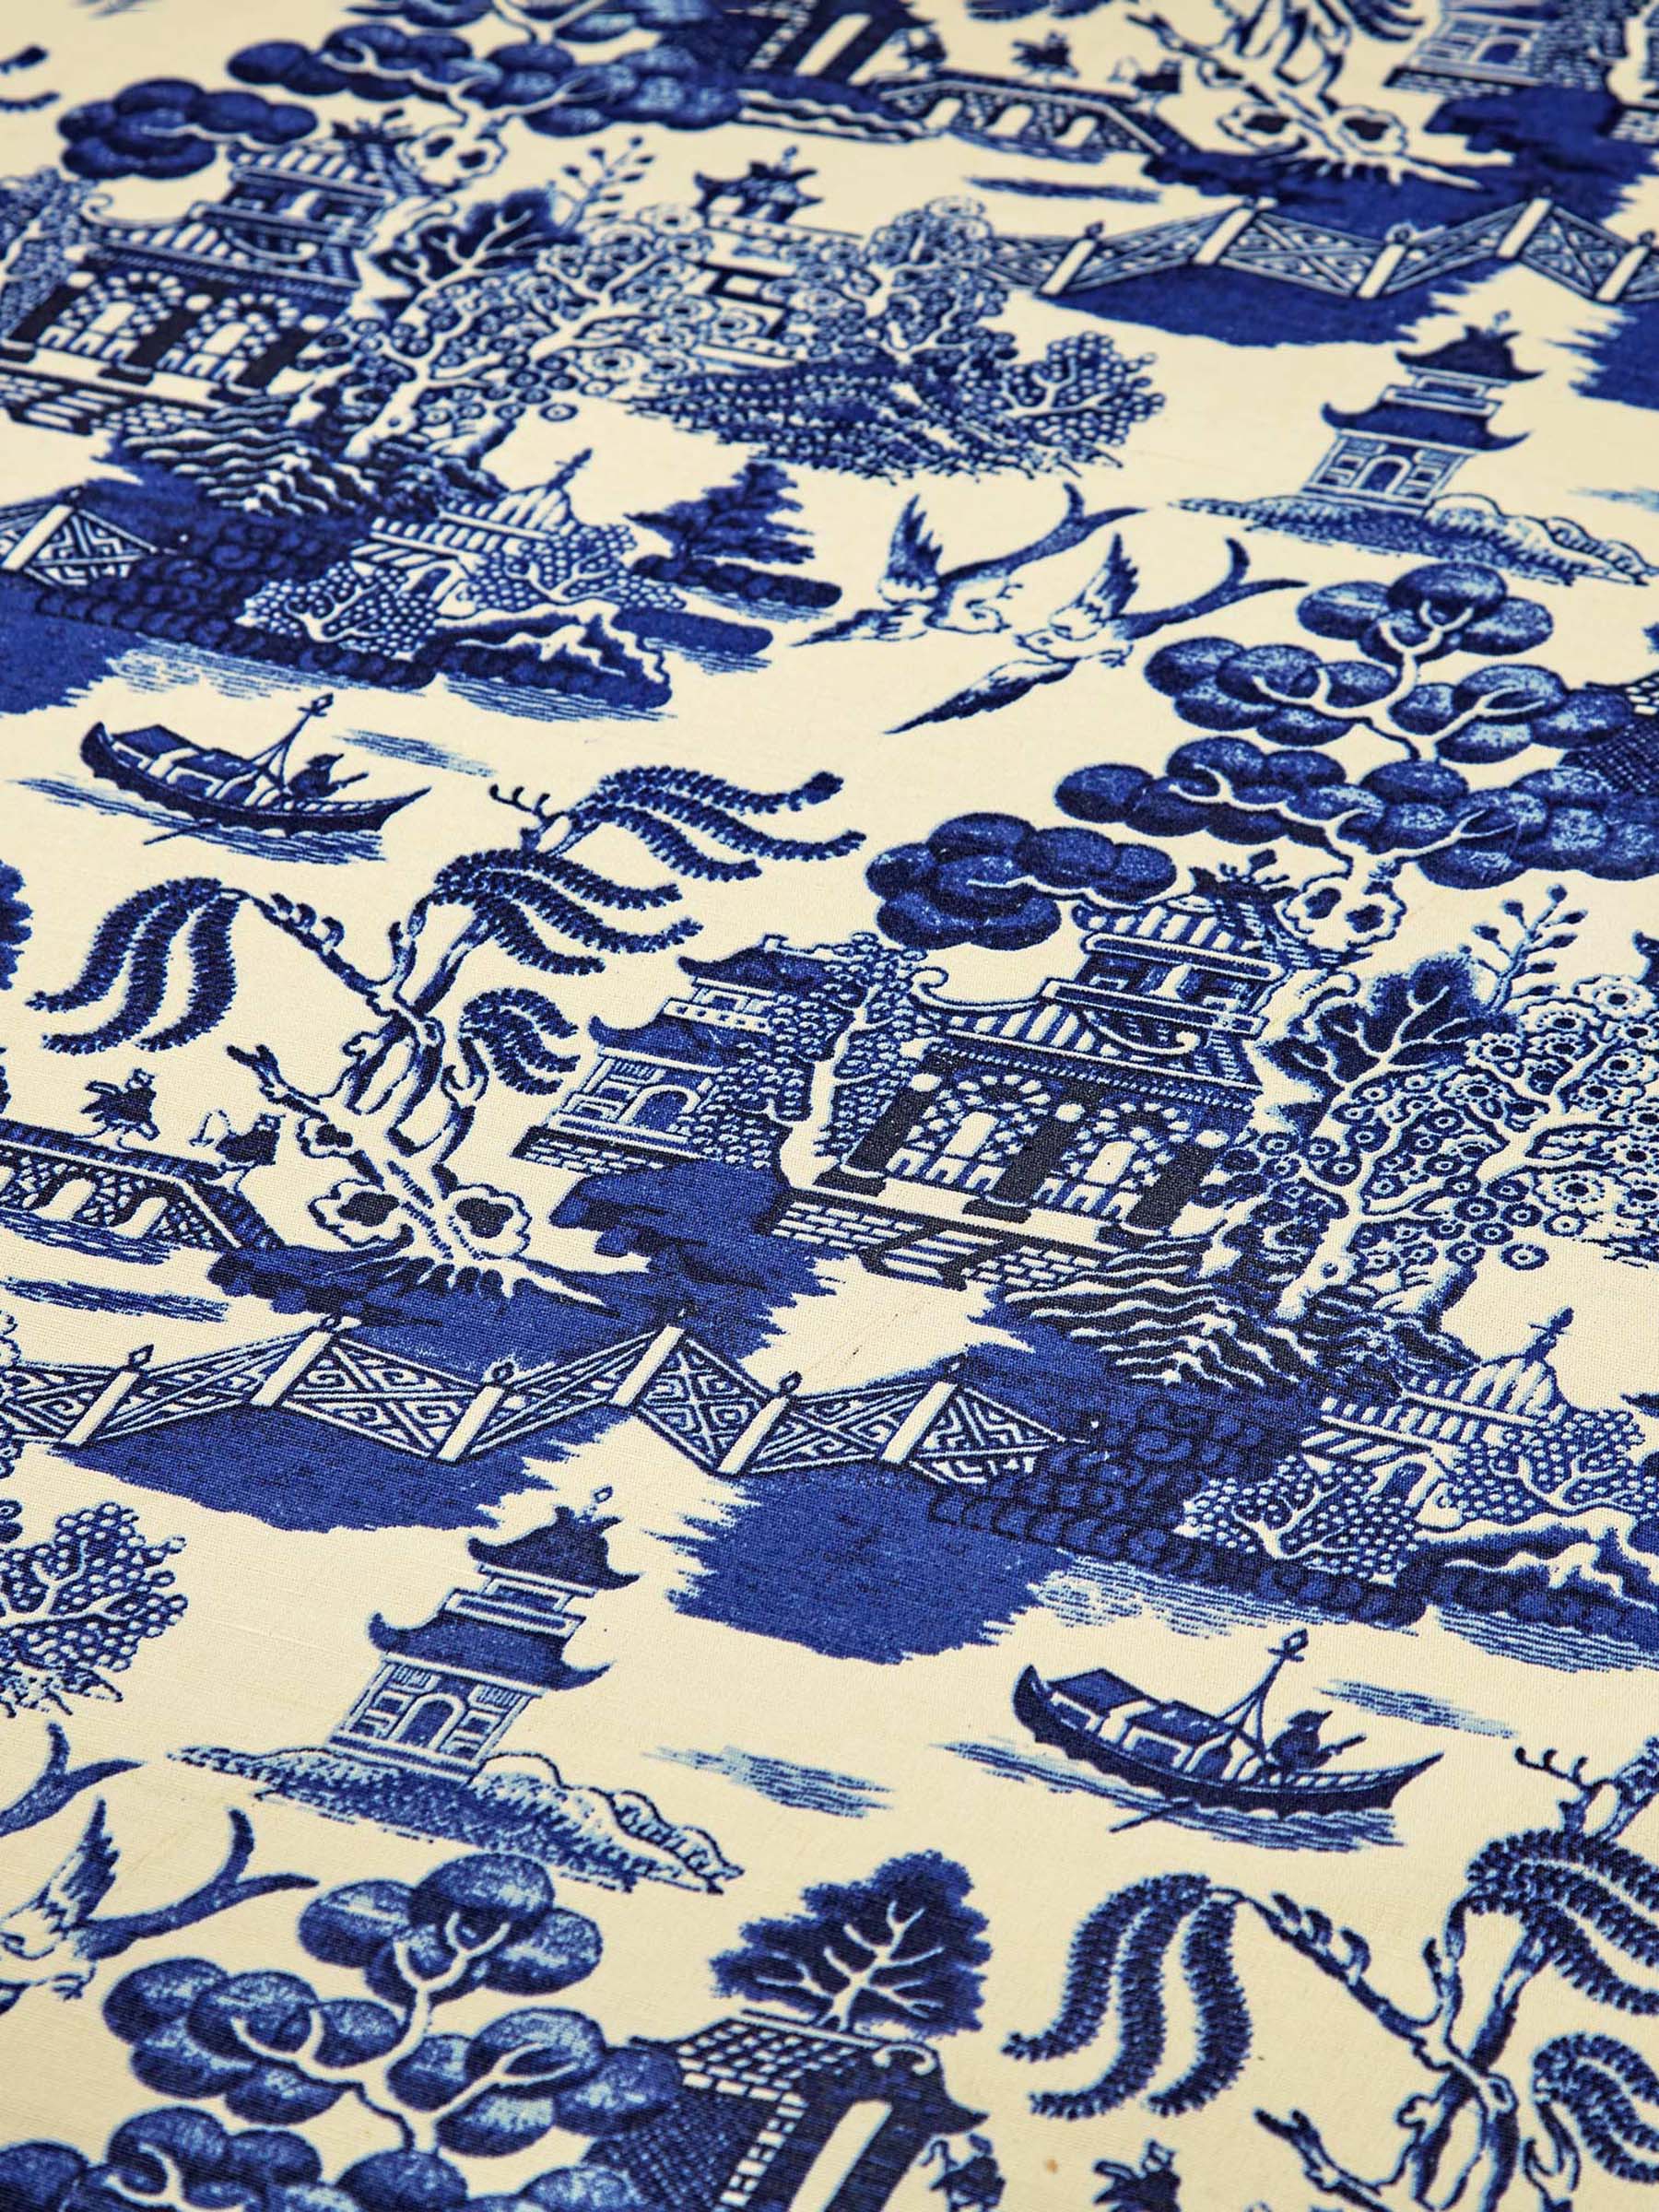 Blue Willow Wallpaper Fabric and More from Roostery and Spoonflower  my  design42